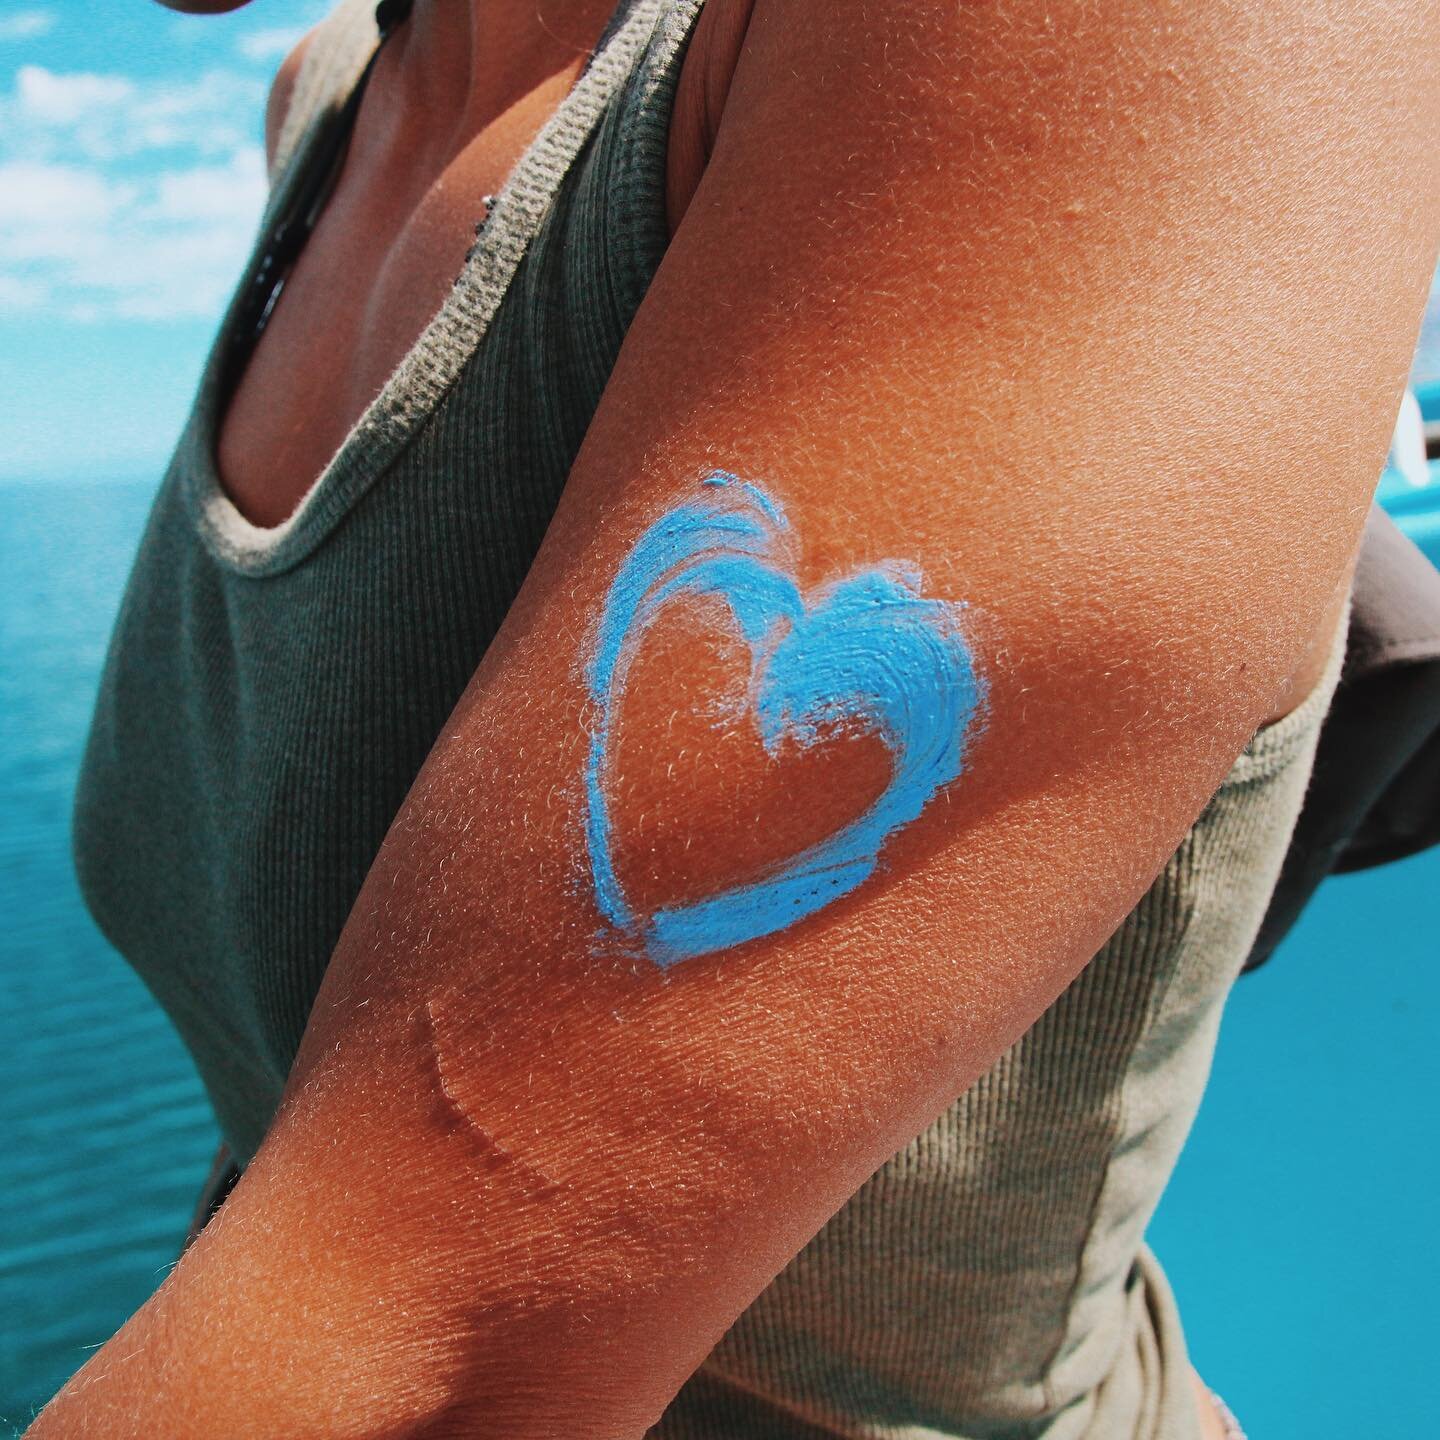 A friendly reminder the best way to send love to Mother Earth on Earth Day is to tell everyone you know to change their sunscreen! 

Do you know the number one ingredient to avoid in your sunscreen or sunblock? Share it below! 

@zecozinc is min&eacu